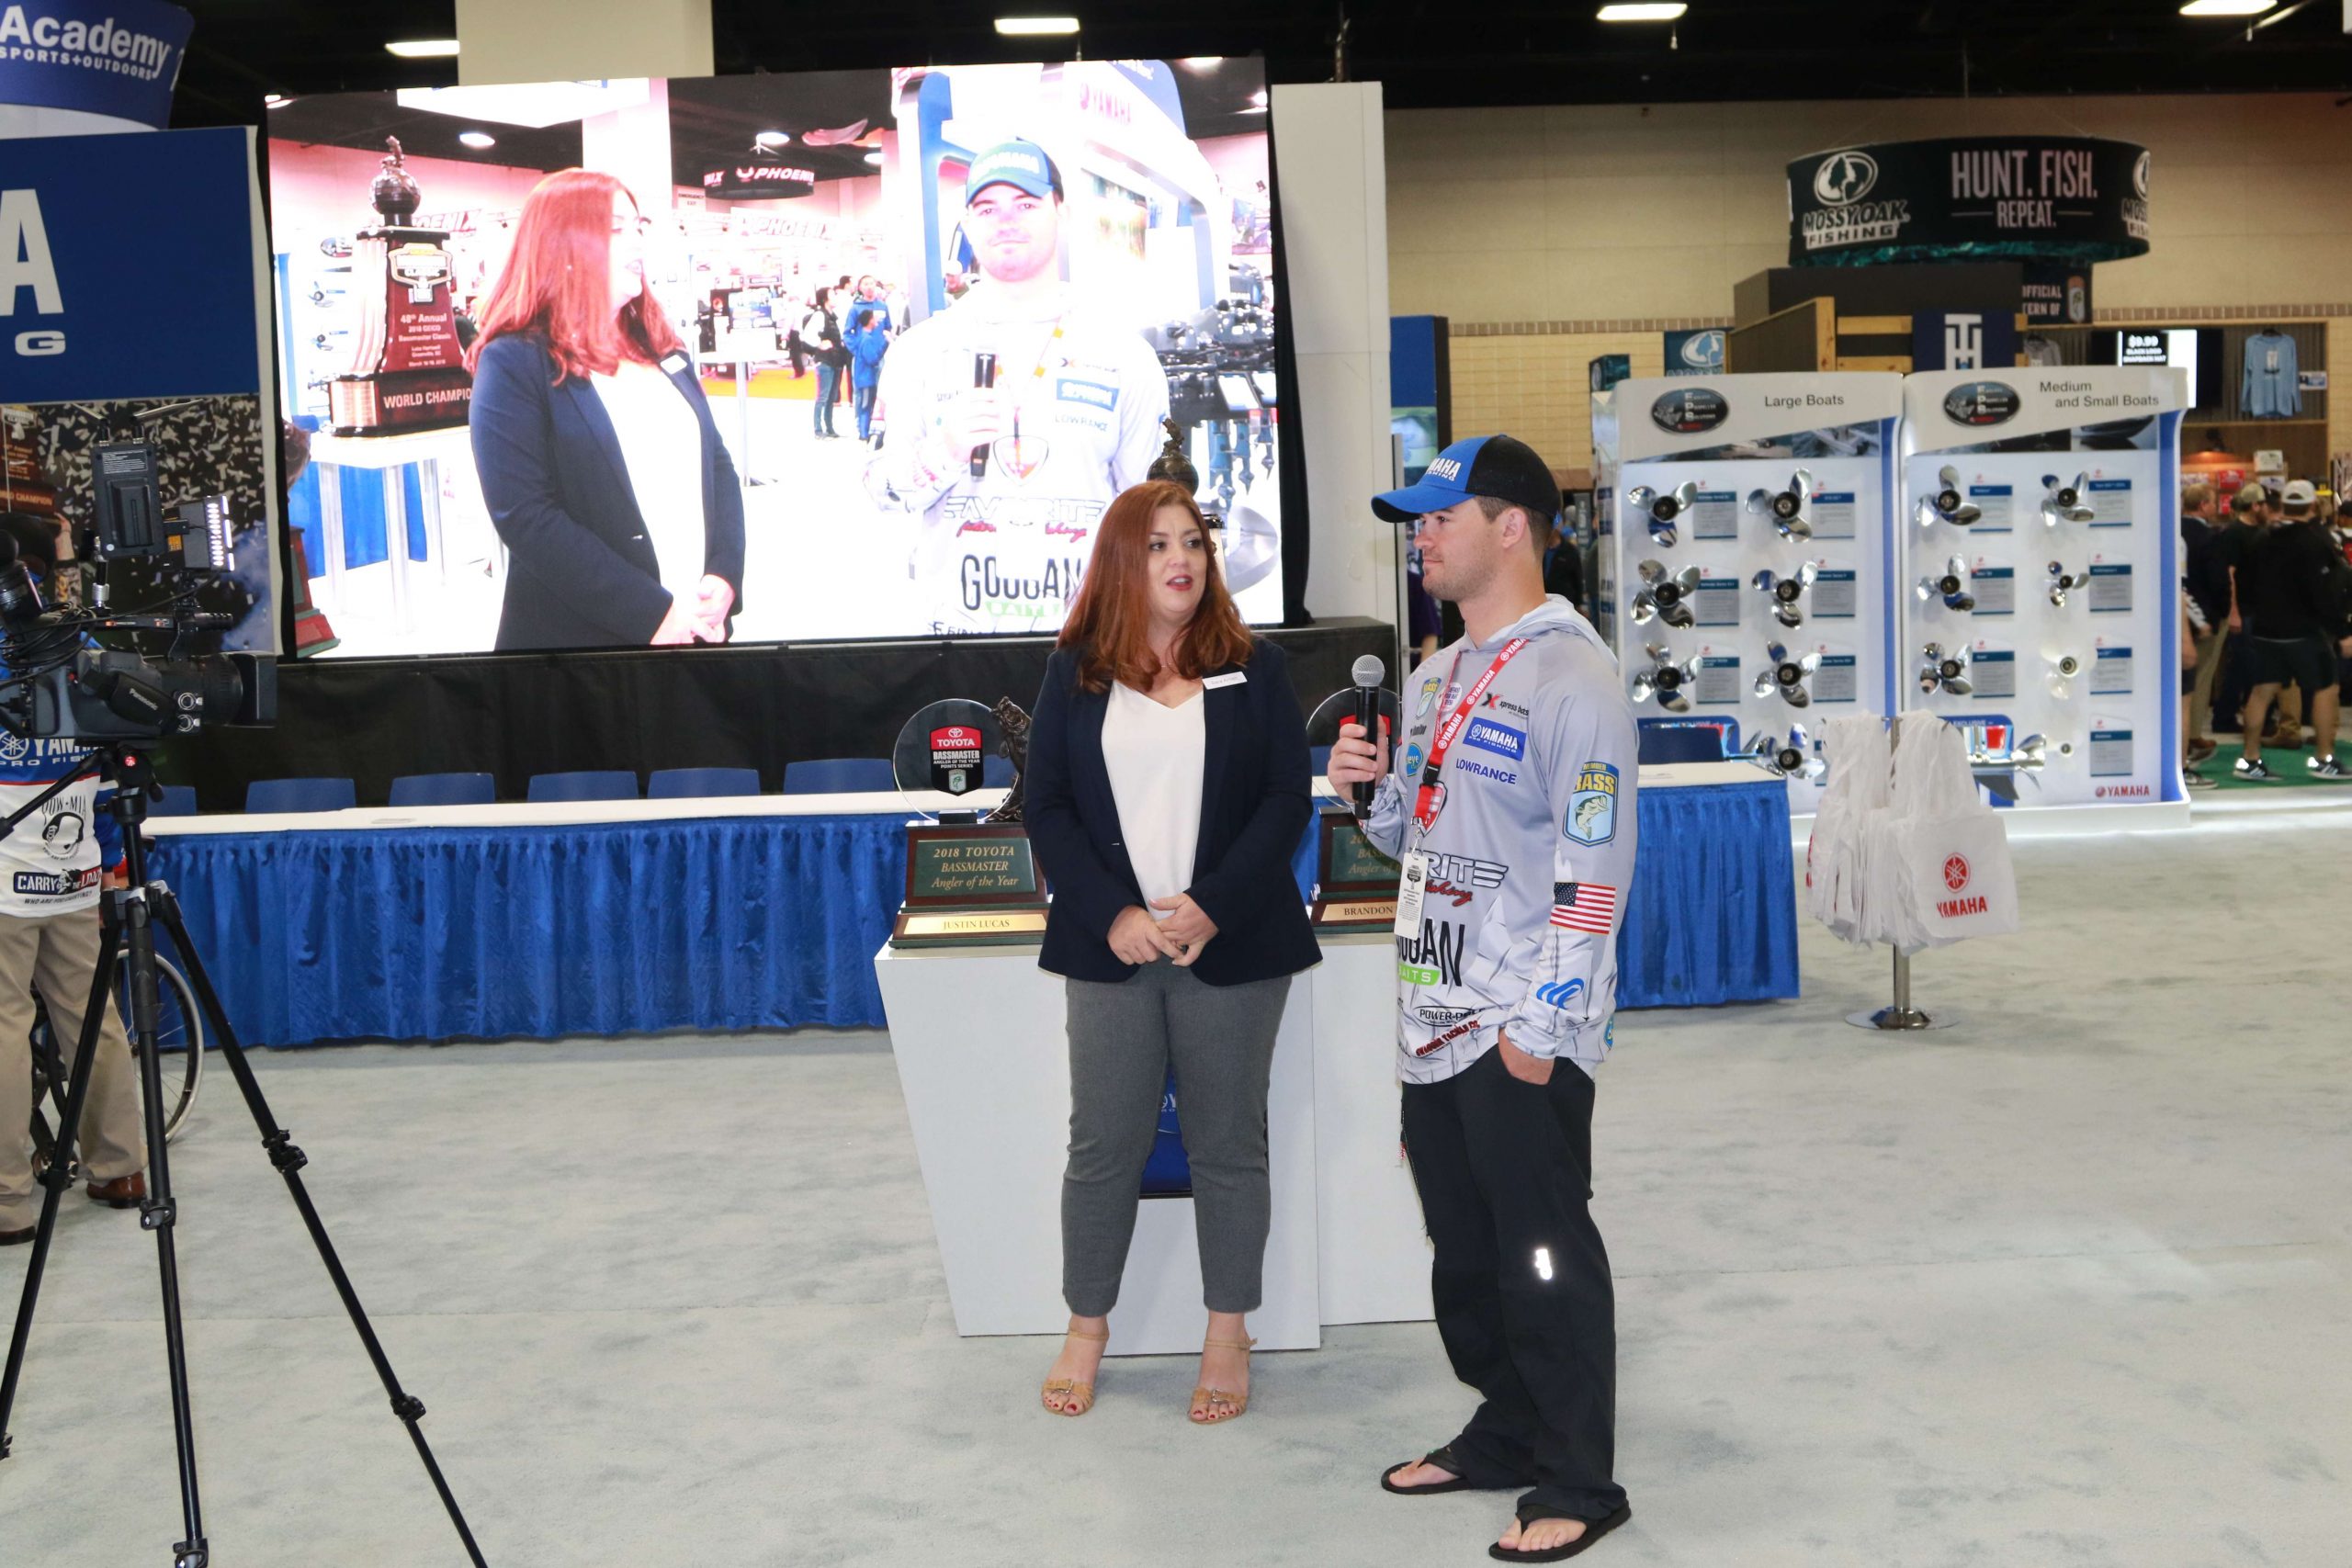 Yamaha product presenter interviews Bassmaster Elite angler Skylar Hamilton, who discusses the Classic waters and likely fishing patterns.